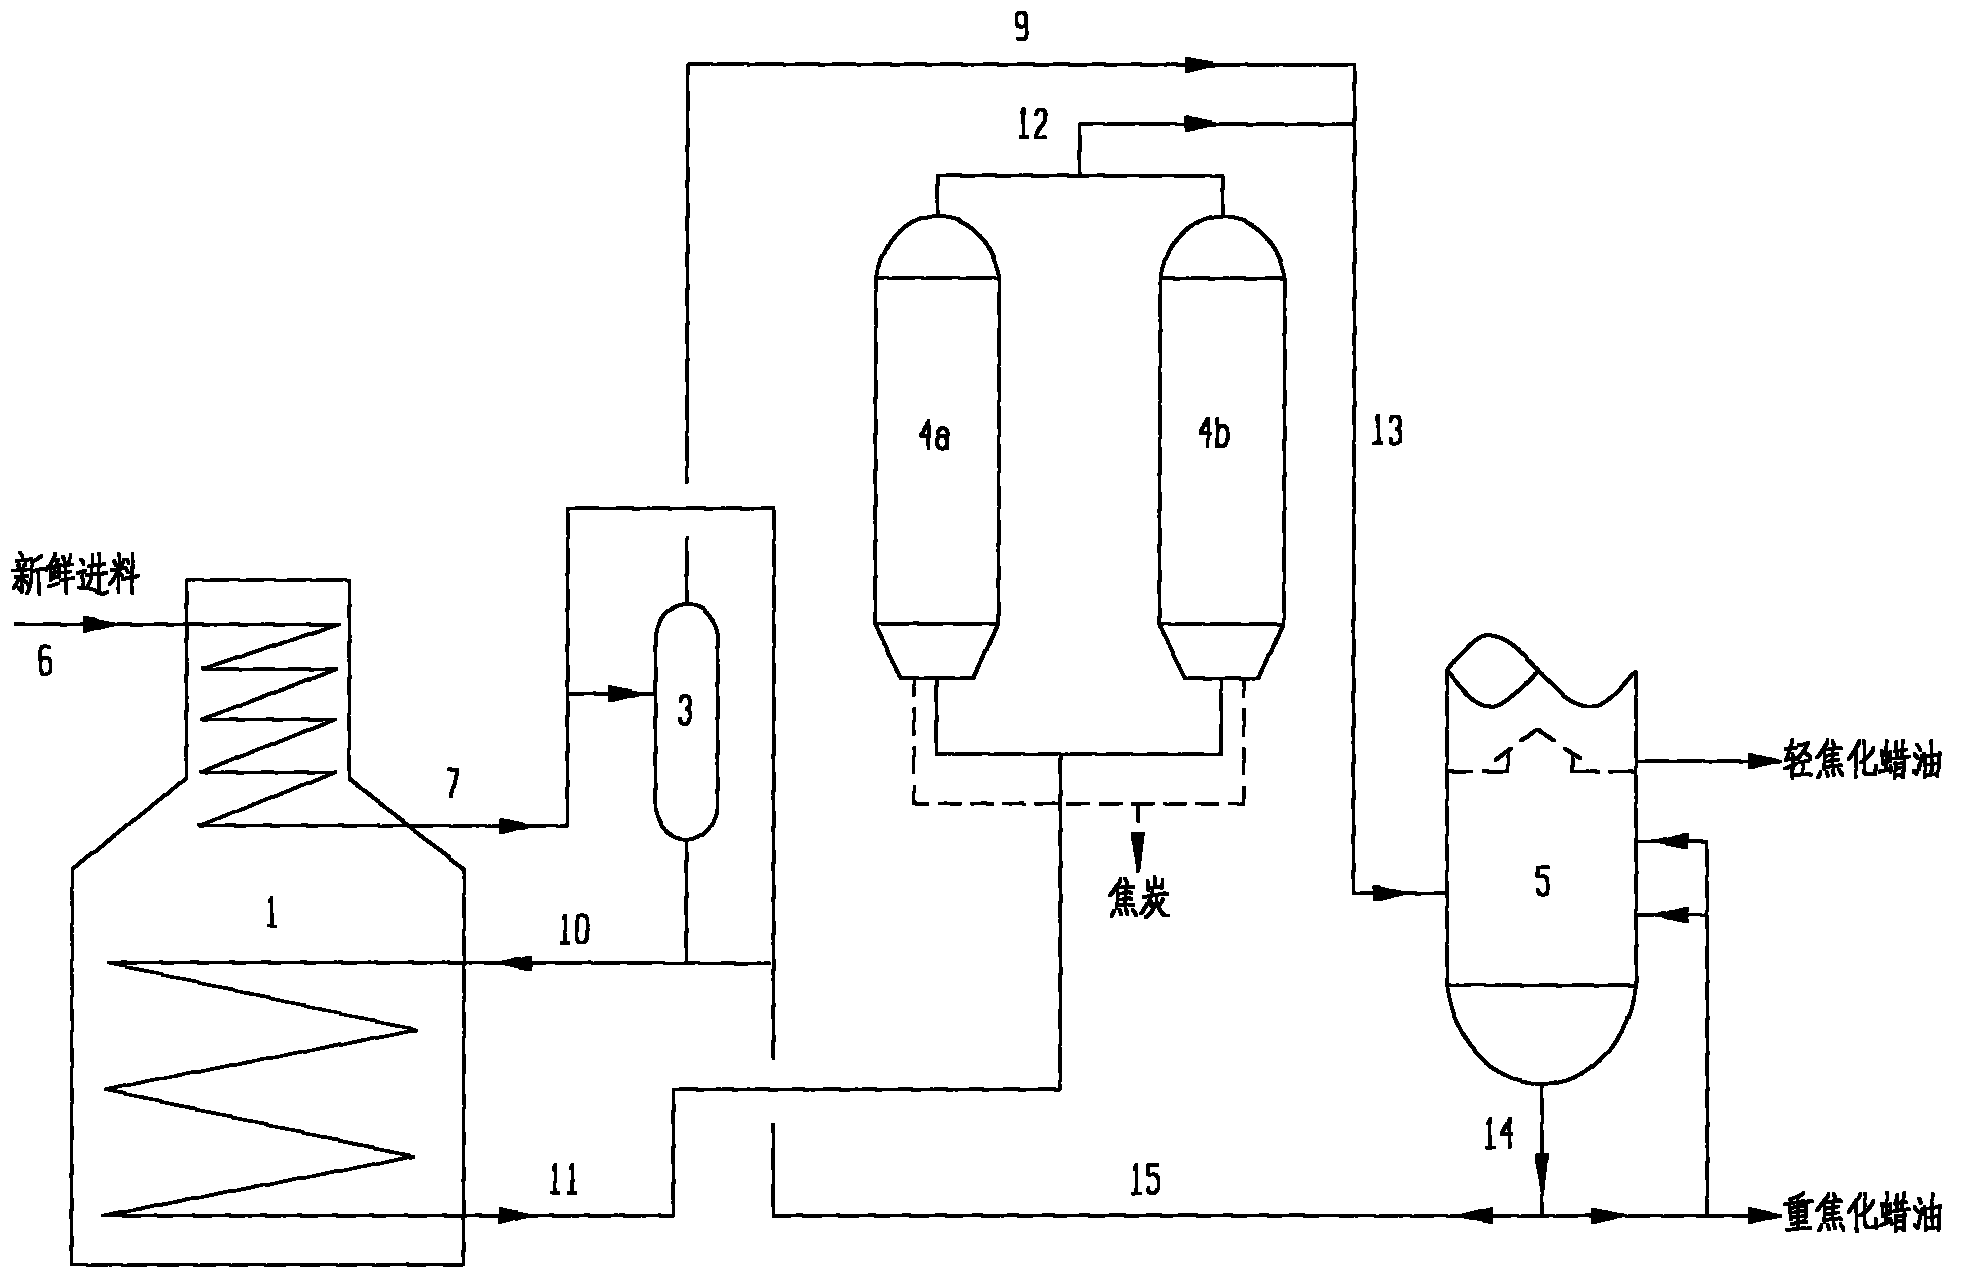 Heavy oil processing process